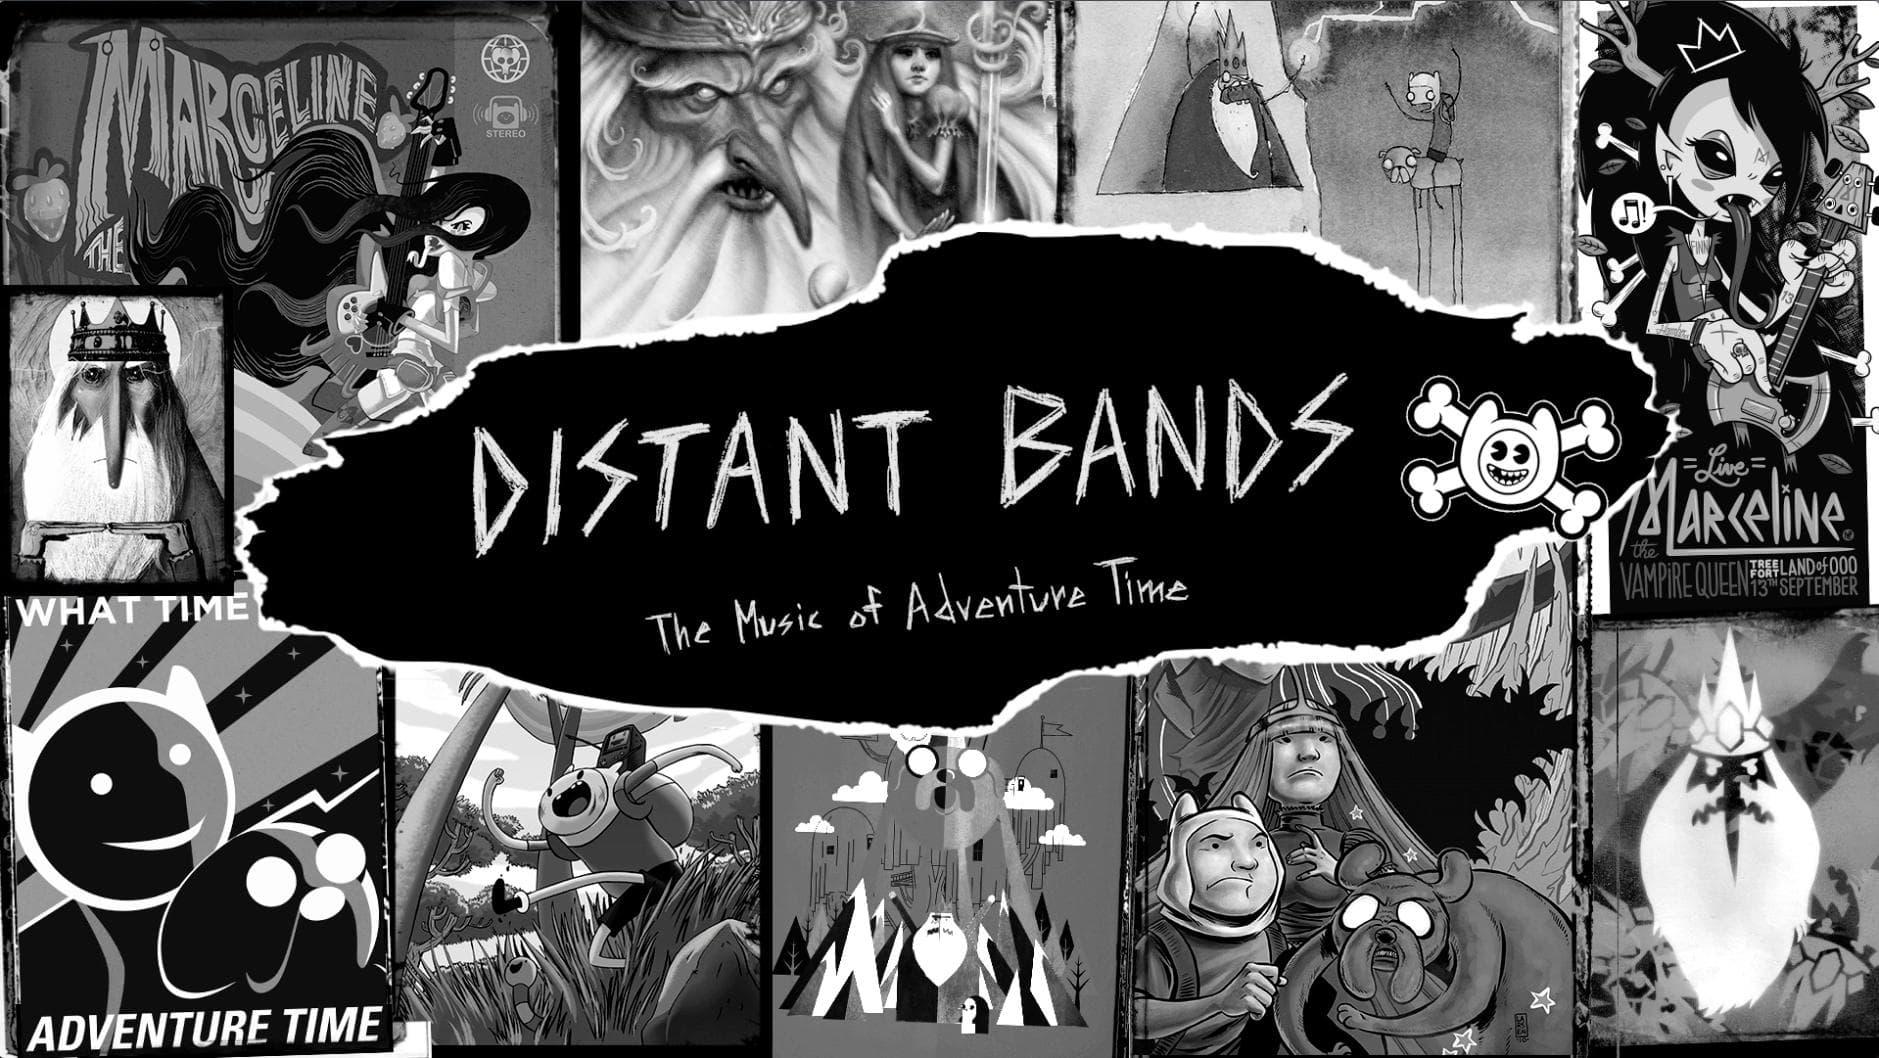 Distant Bands: The Music of Adventure Time backdrop